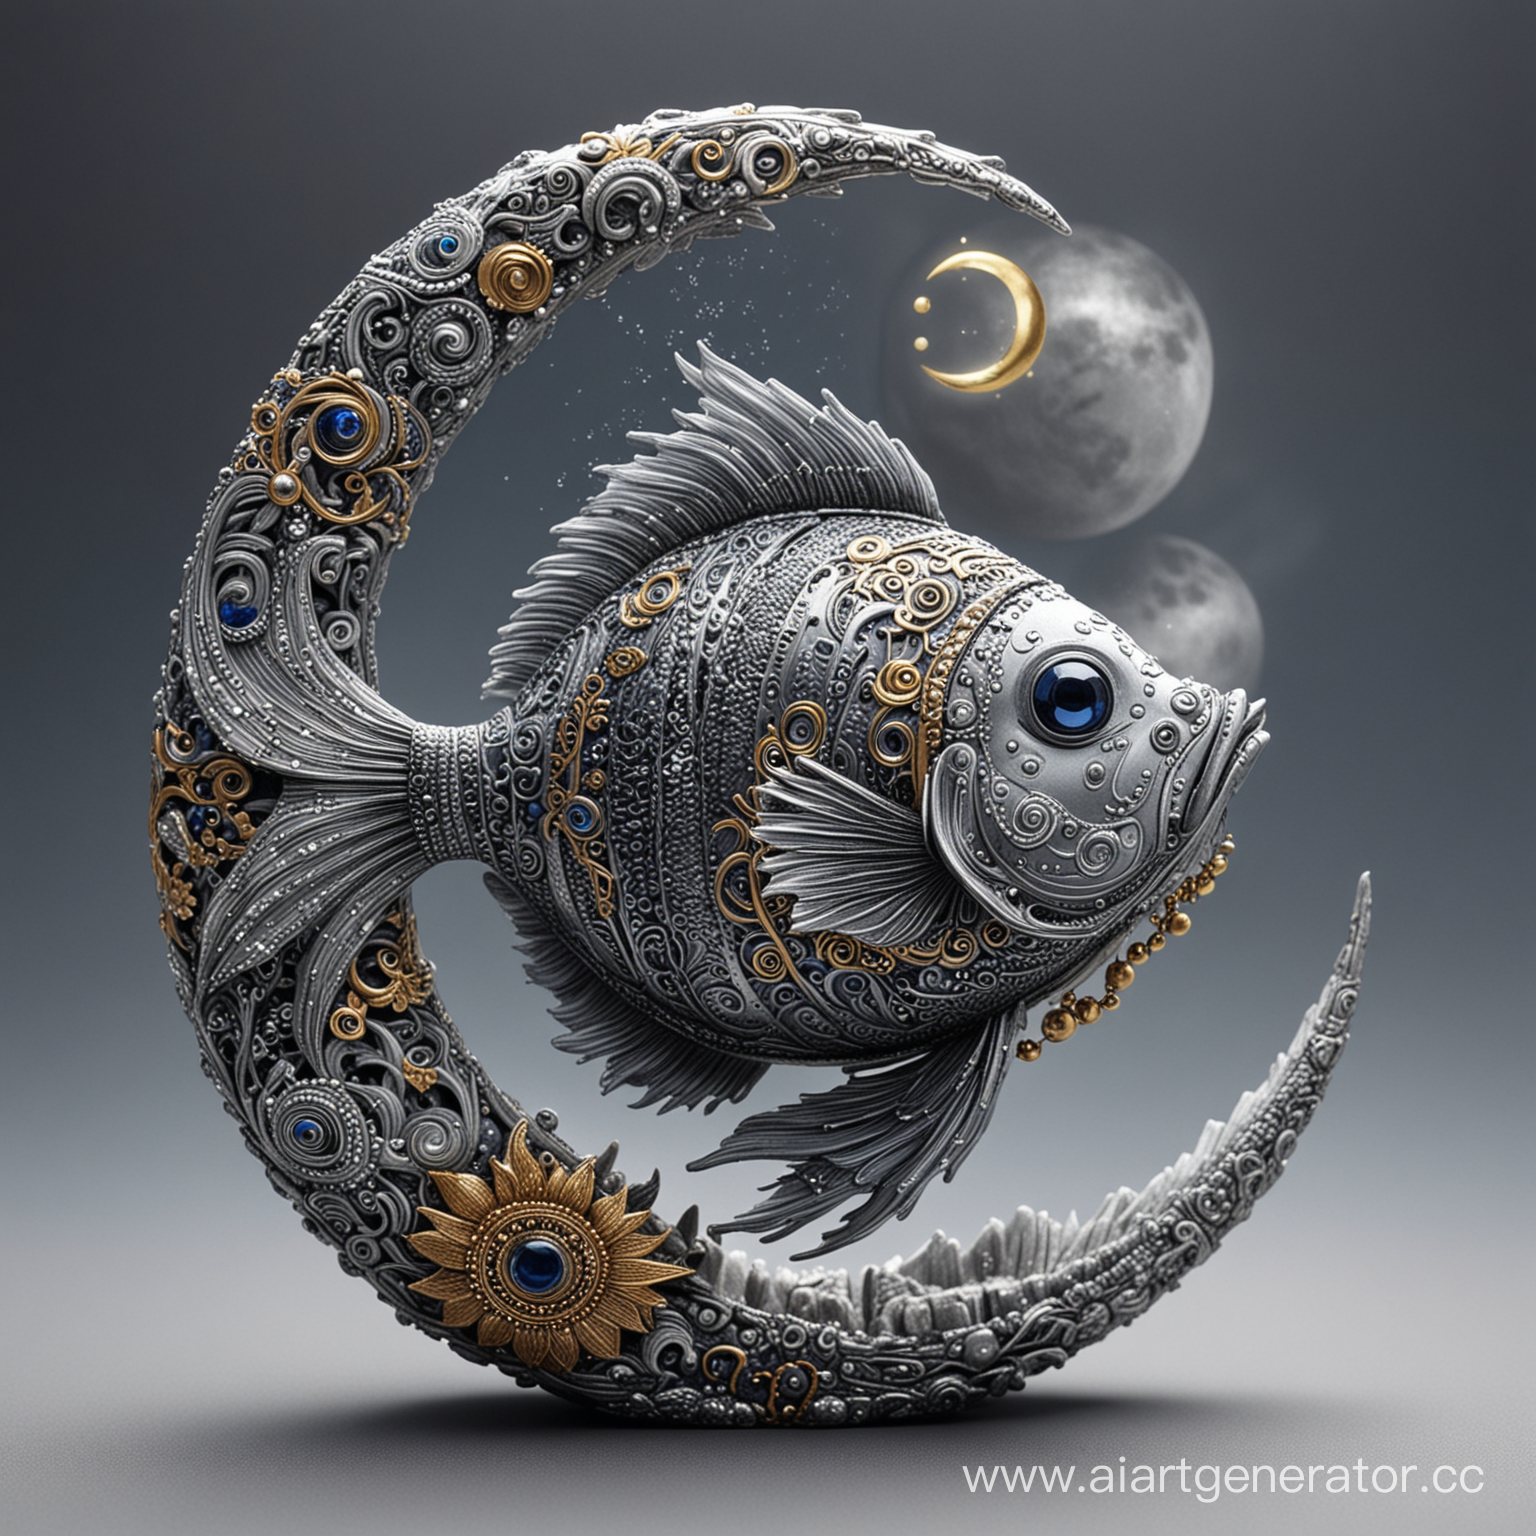 Mystical fish-moon figurine, in ethnic style, symbolic, with many details and textures, in gray, silver, black, white, dark blue, gold colors Скачать оригинал изображения с сайта: Midjo.ru